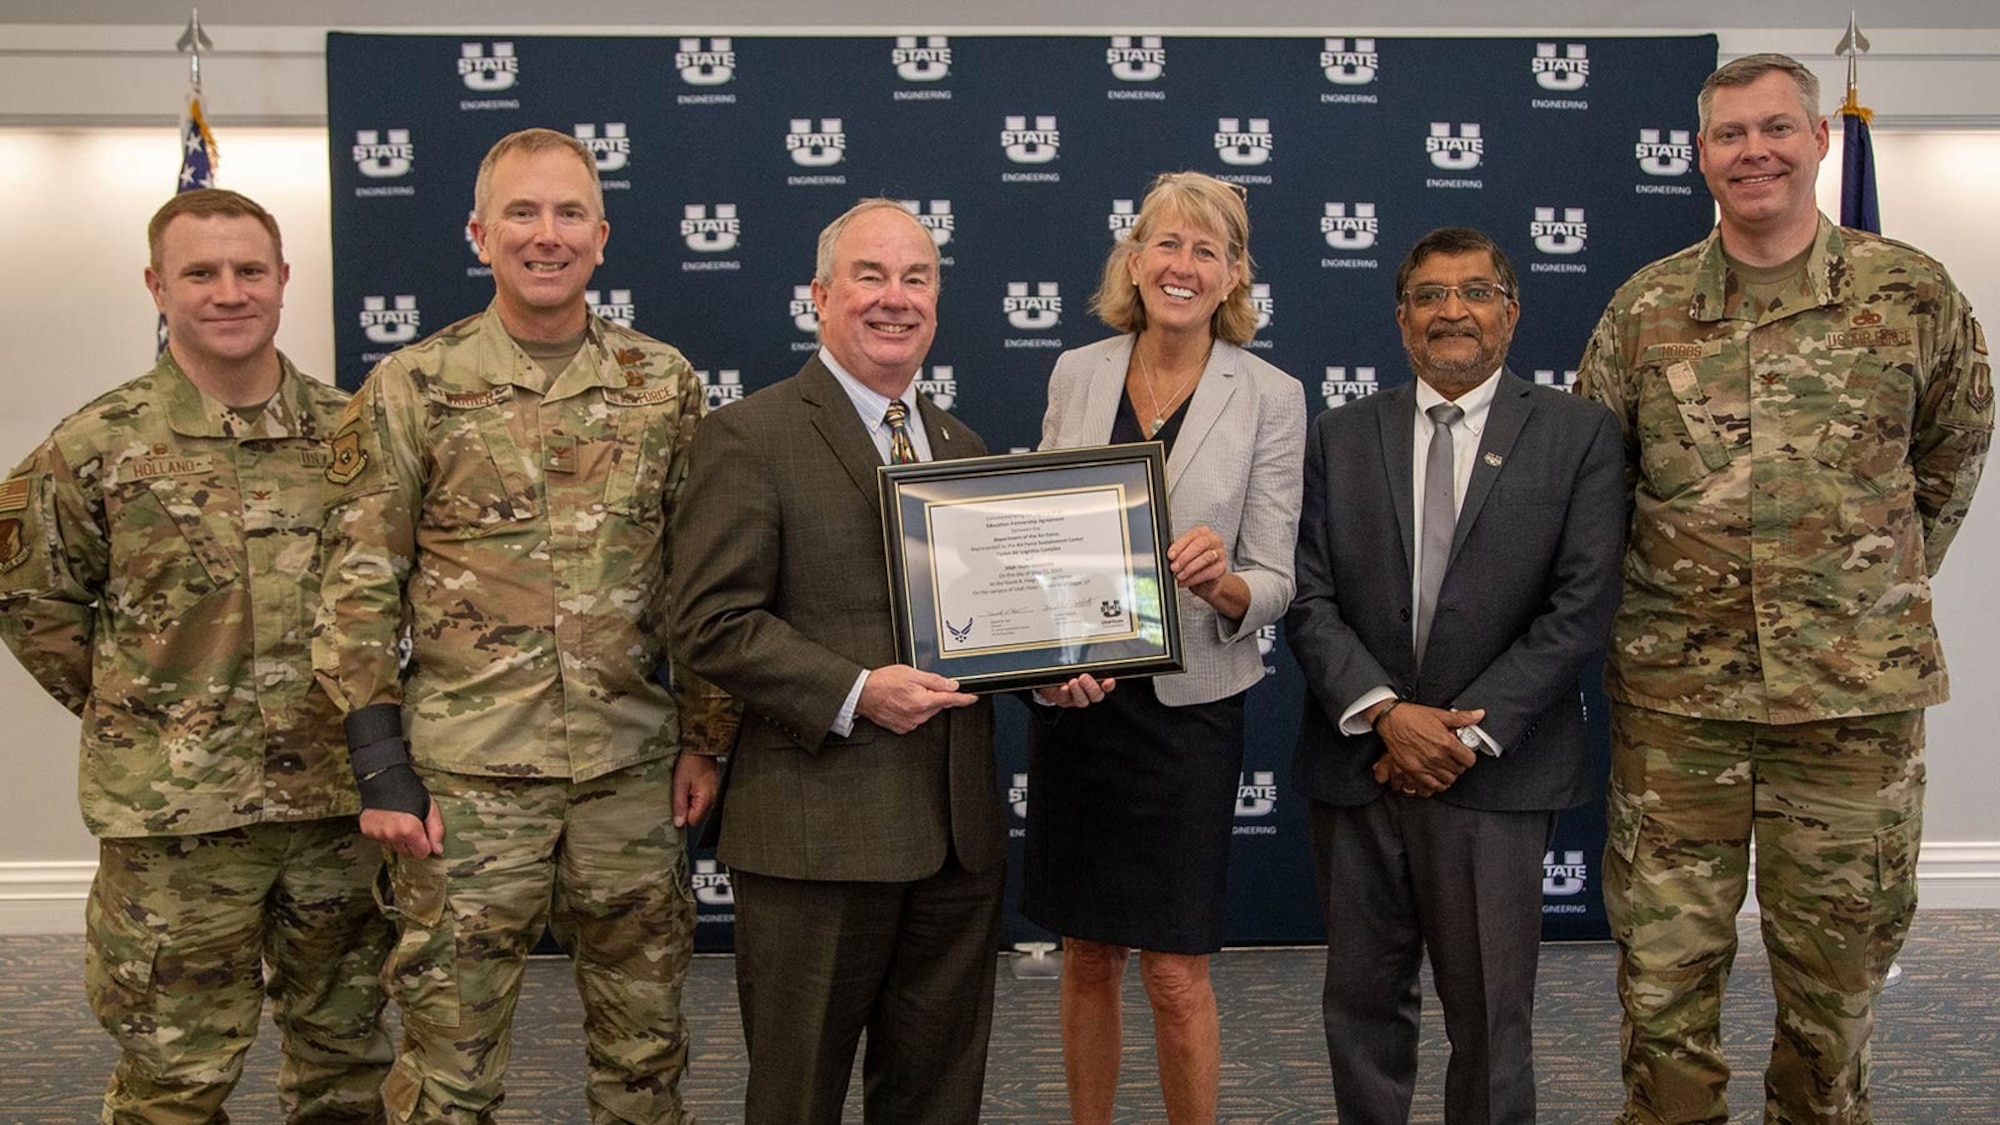 Leadership from Hill Air Force Base and Utah State University signed a new educational partnership agreement that will create enhanced learning opportunities for students and spur innovative joint research efforts.